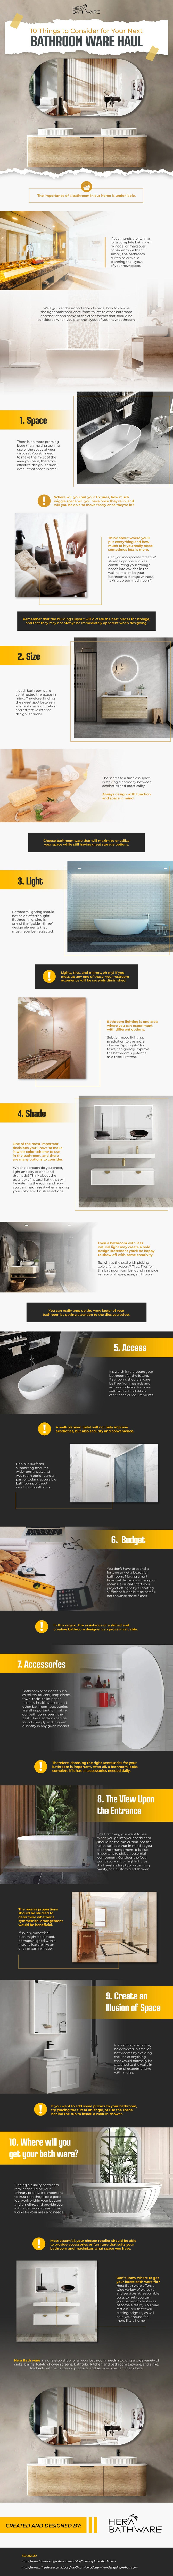 10-Things-to-Consider-for-Your-Next-Bathroom-Ware-Haul-freestanding-wall-hung-led-bathroom-mirror-vanity-infographic